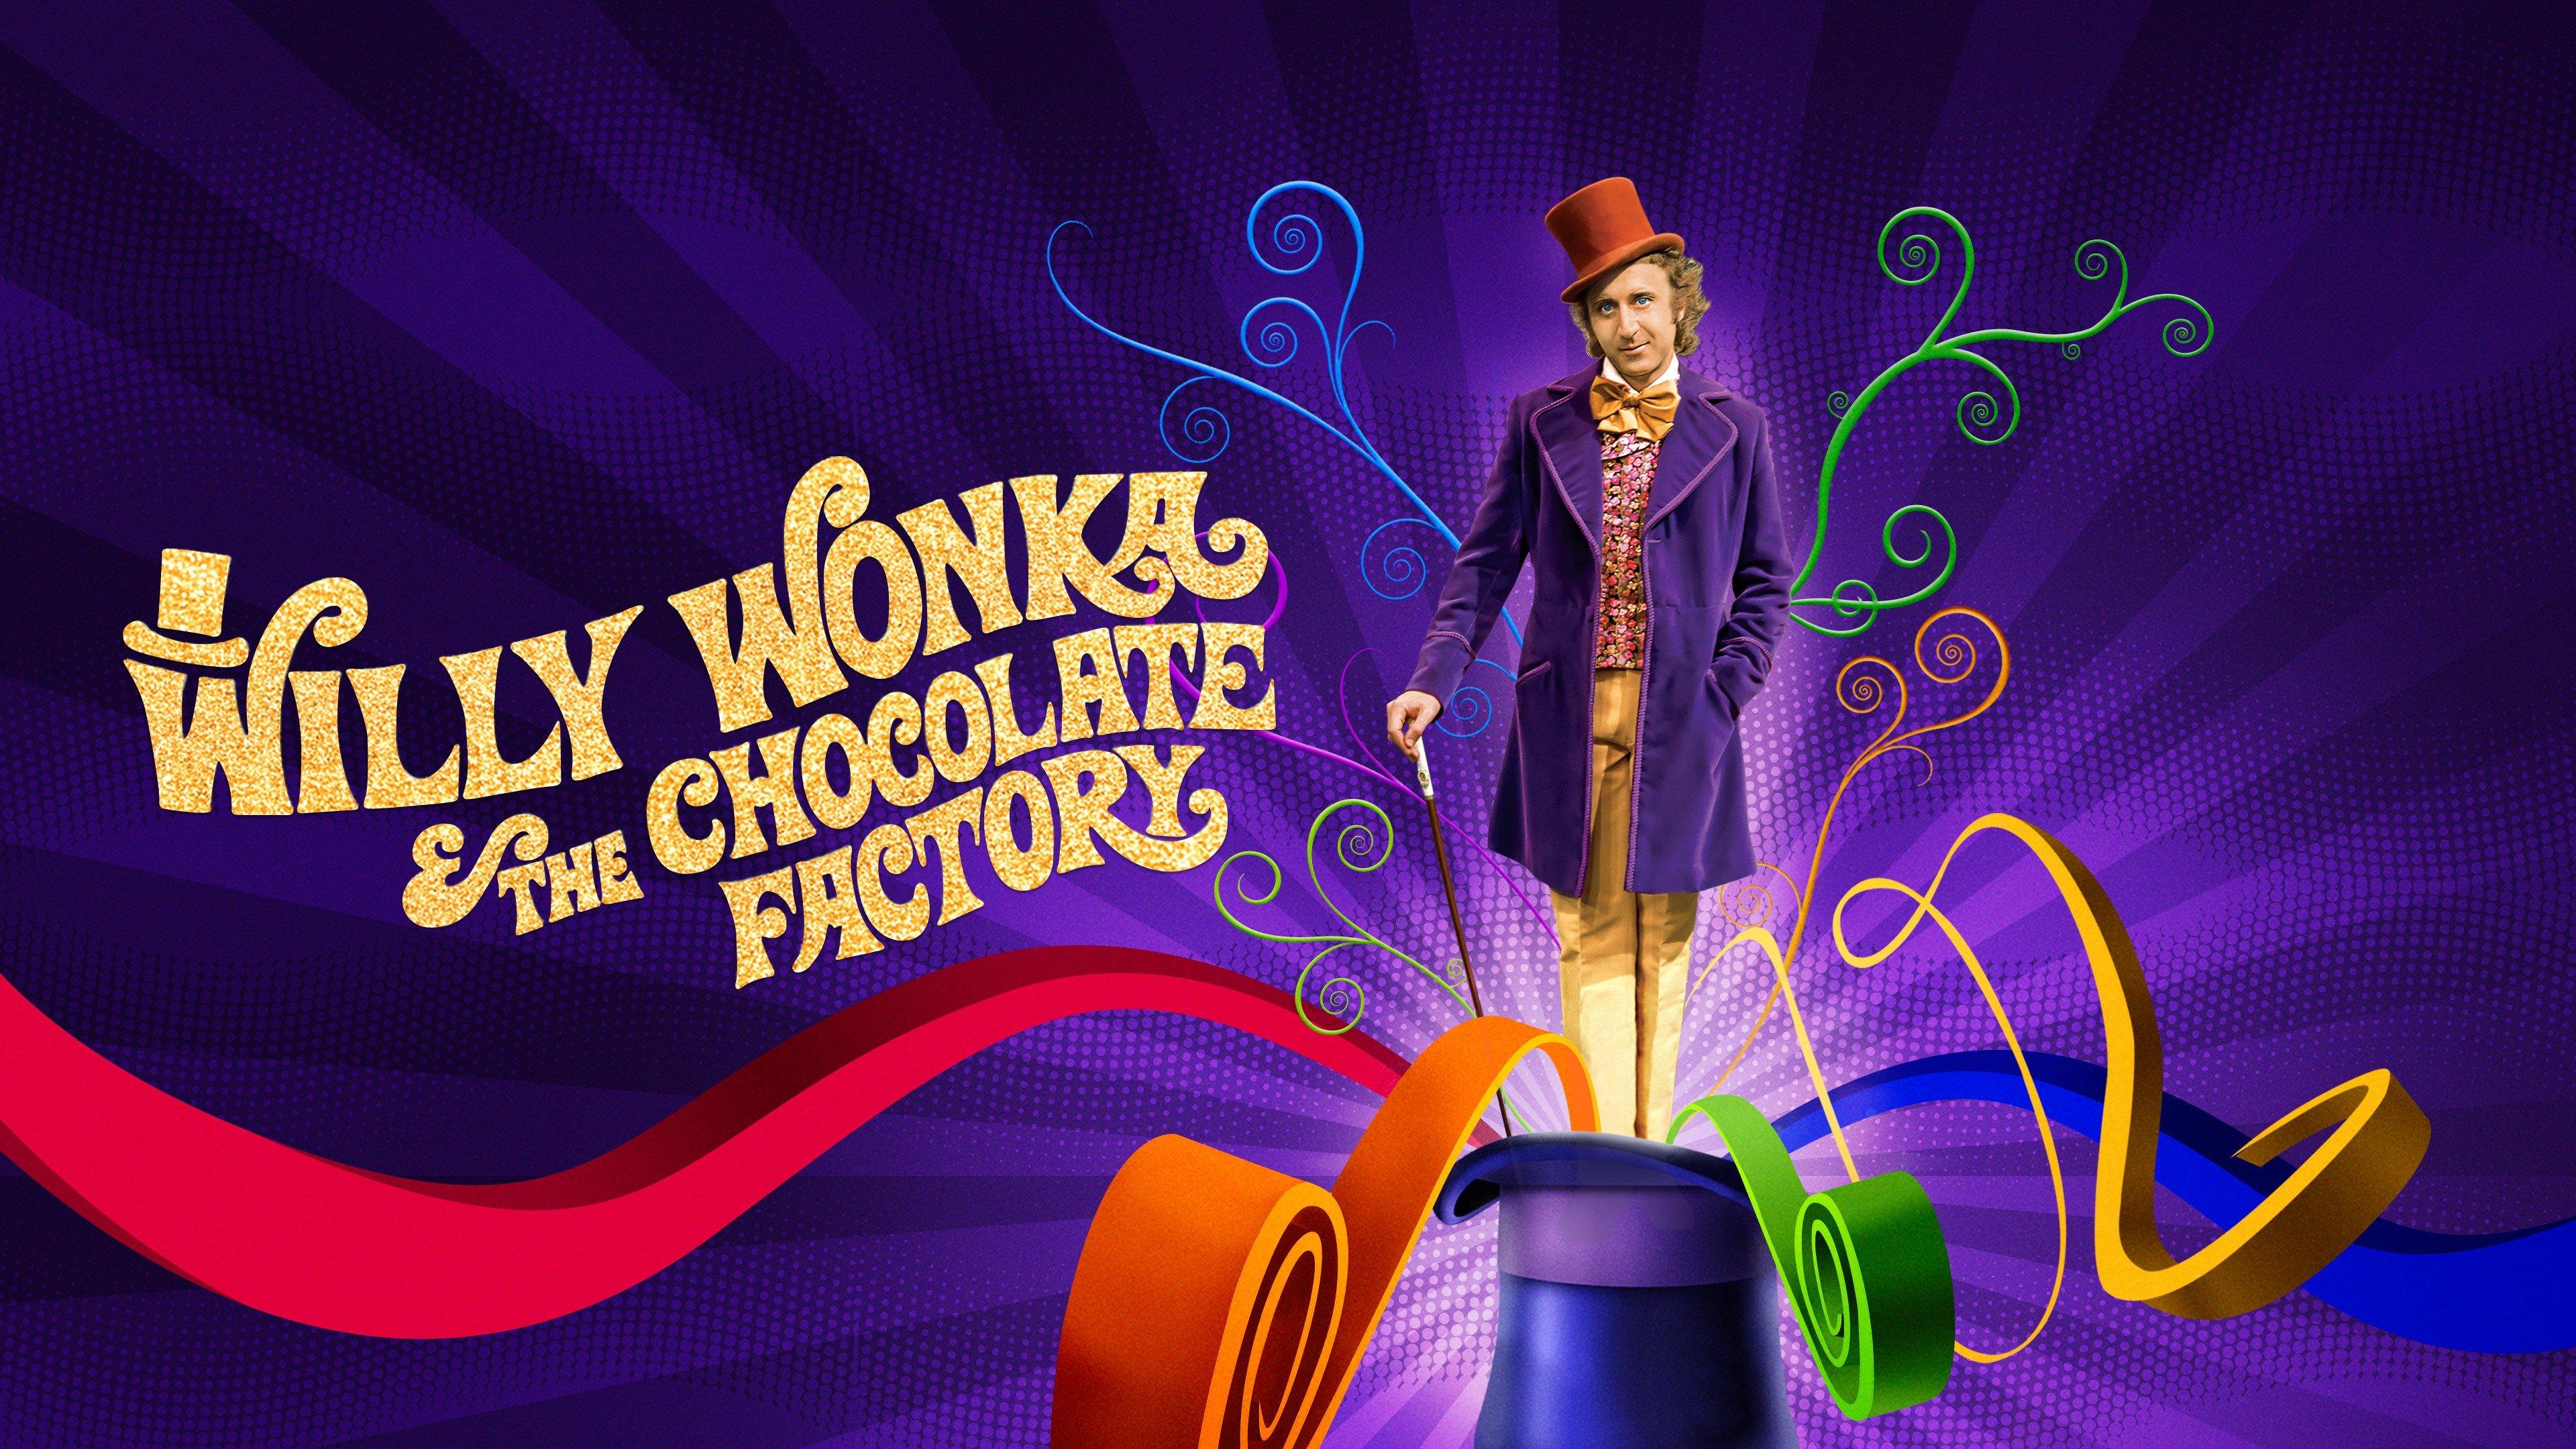 Watch Willy Wonka and the Chocolate Factory Streaming Online on Philo